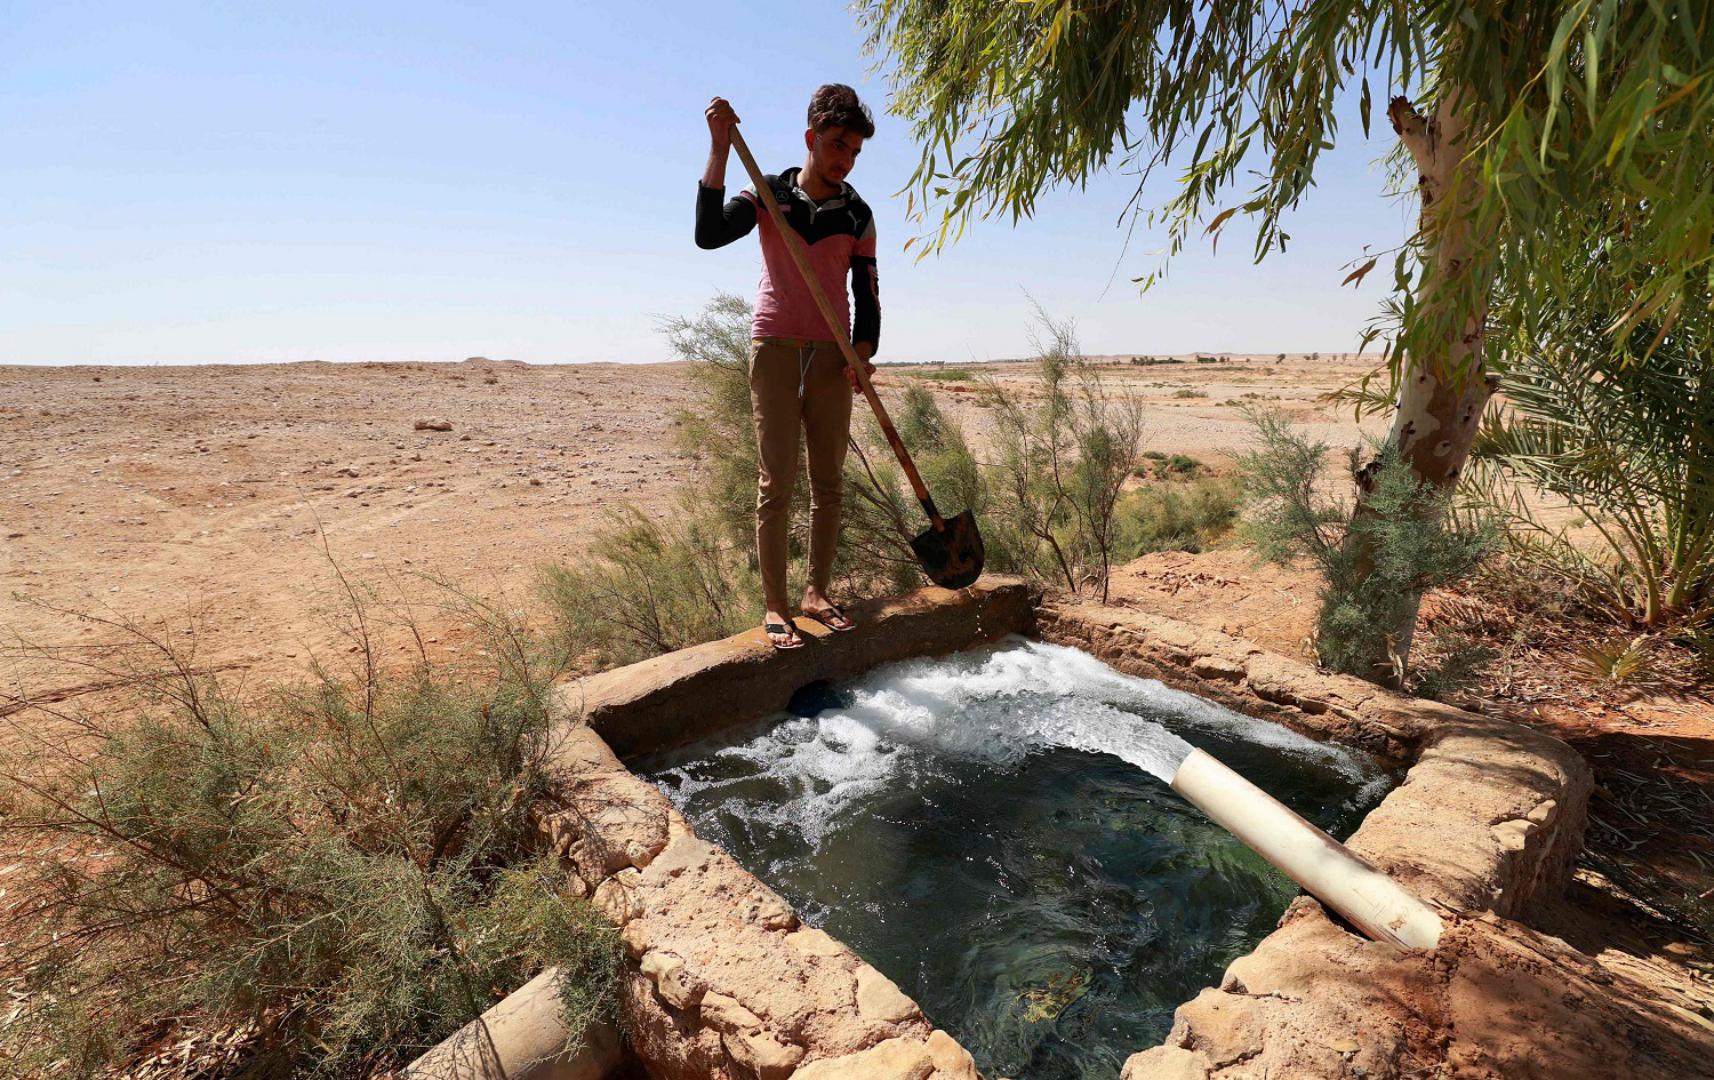  Pumps draw salty water from wells in Al-Sahl. Residents say they use the water unfiltered for drinking and washing, and for their animals, while rainwater is used for farming Ahmad AL-RUBAYE AFP